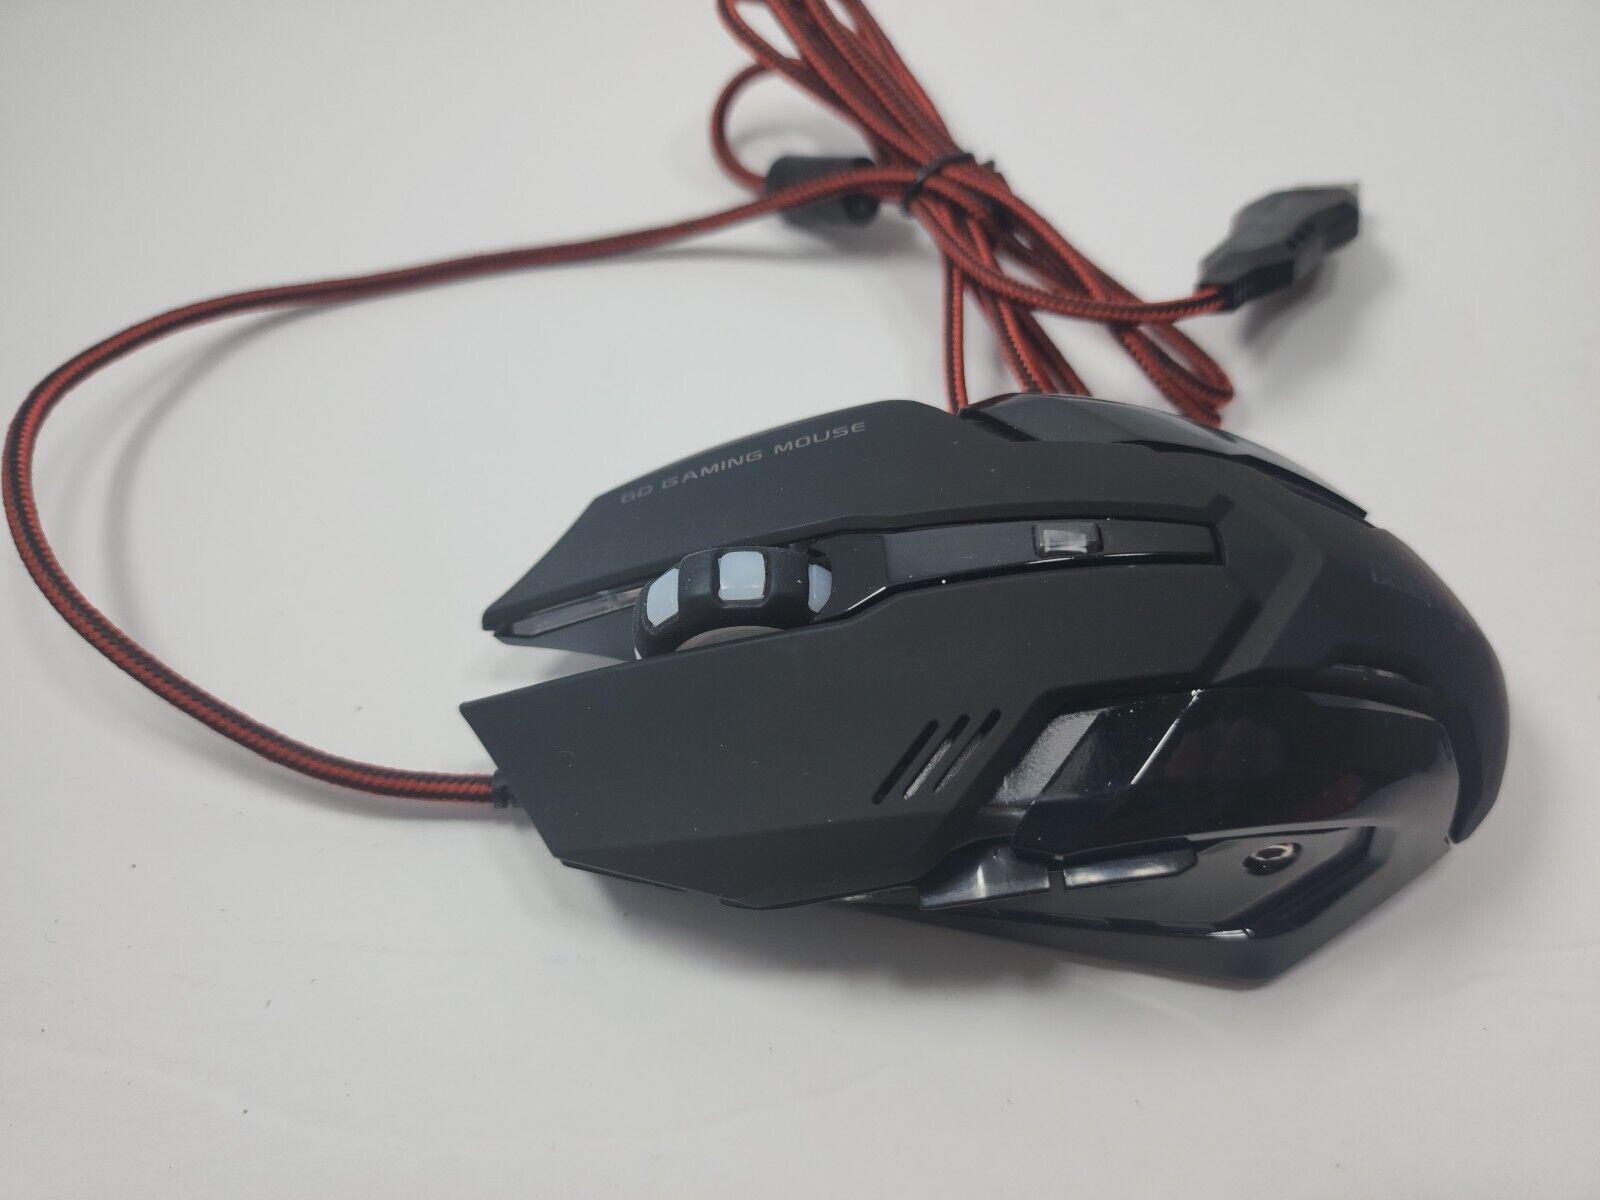 What Does The M Button Do On The Bluefinger Gaming Mouse